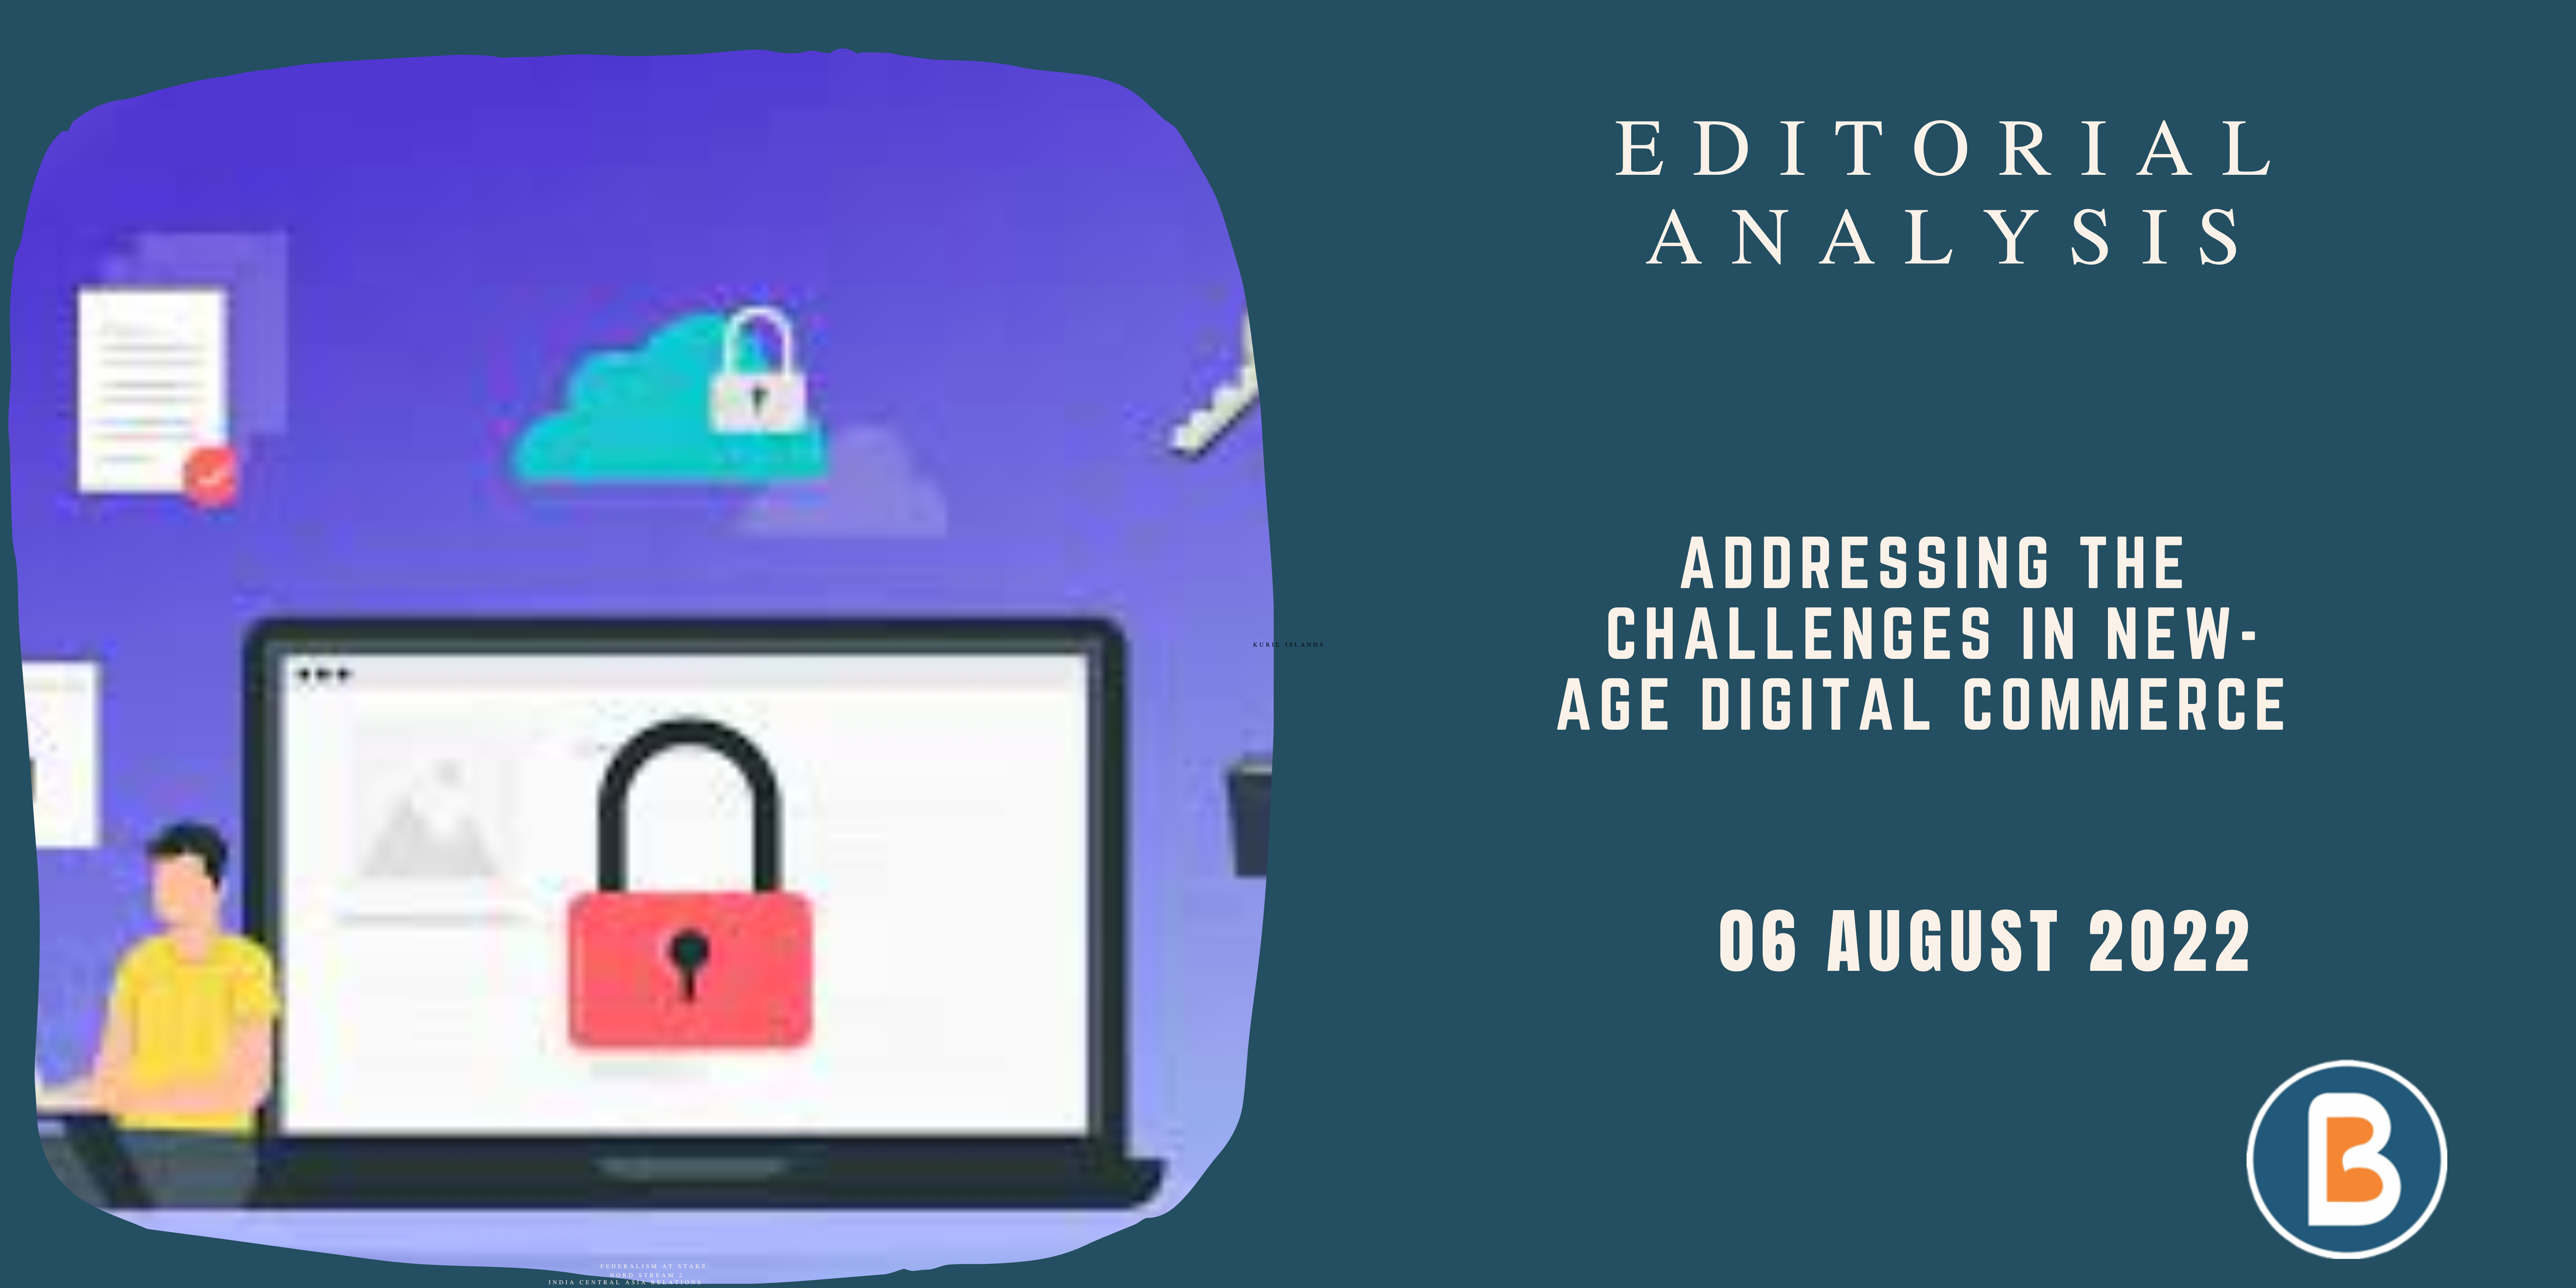 Editorial Analysis for IAS - Addressing the Challenges in New-age Digital Commerce